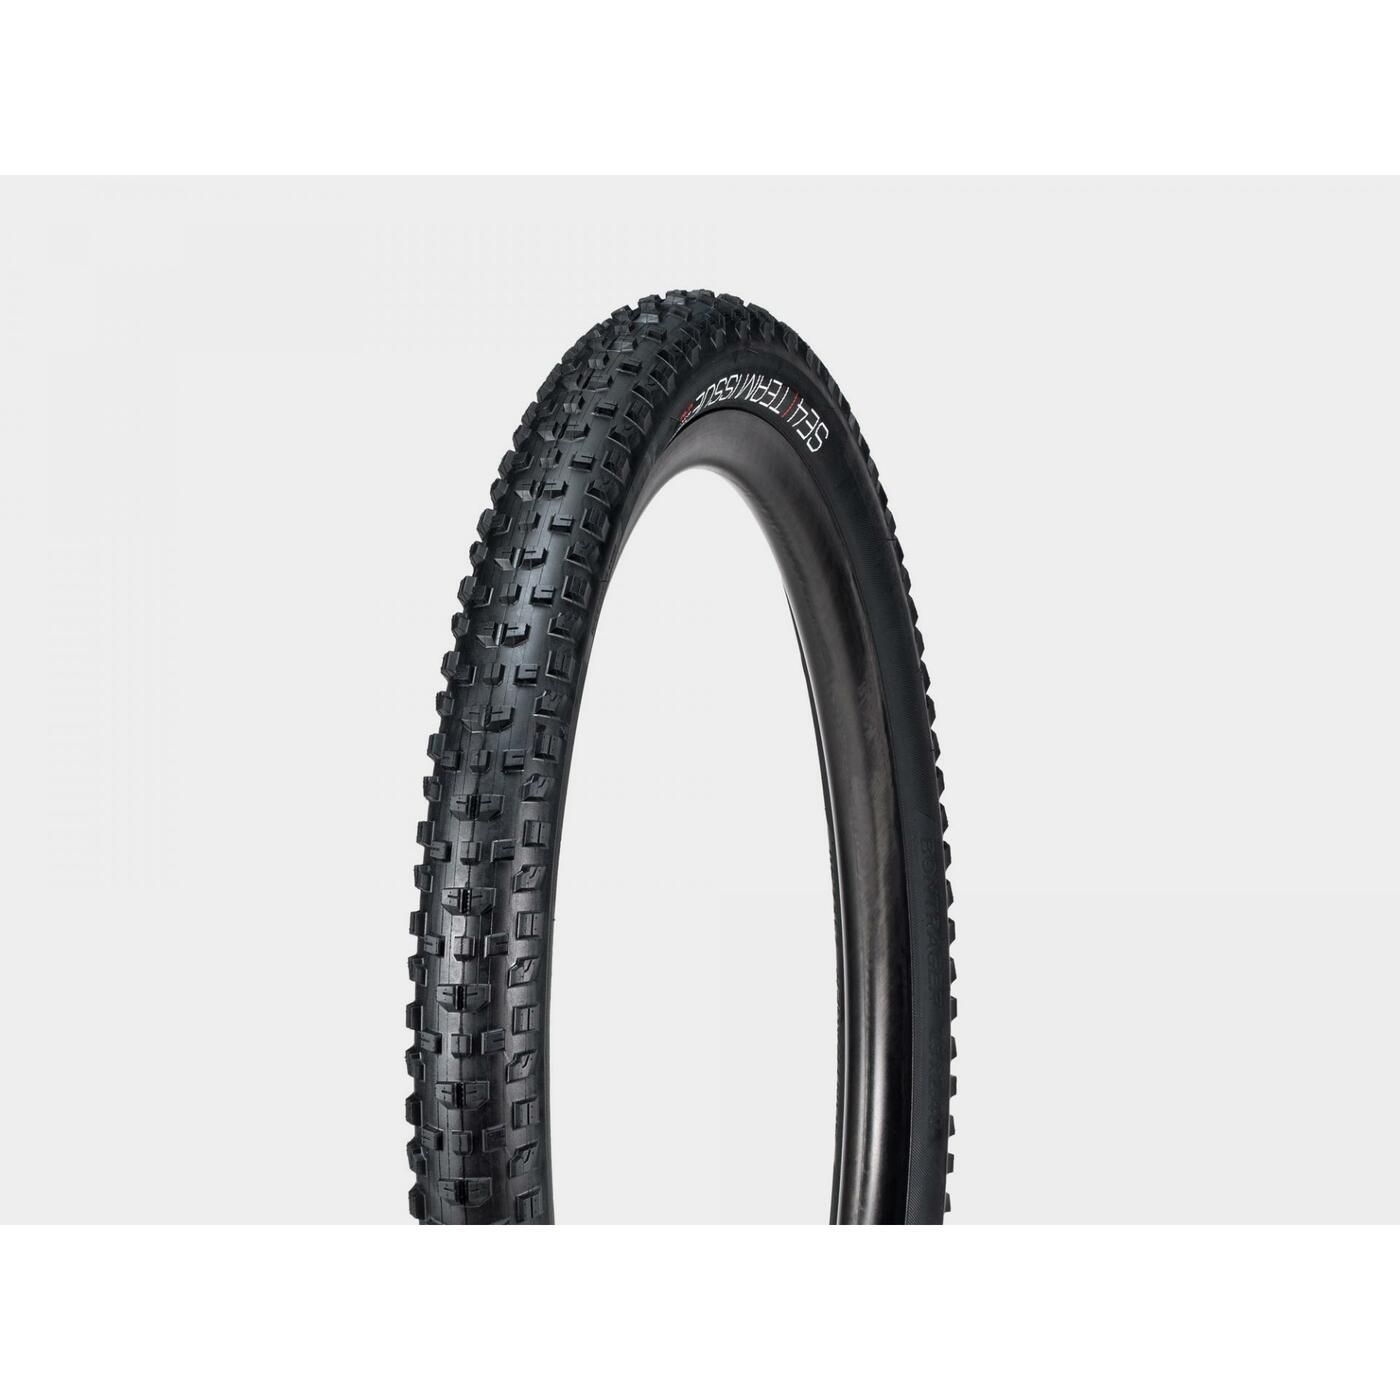 Bontrager Rengas SE4 Team Issue TLR MTB Tire